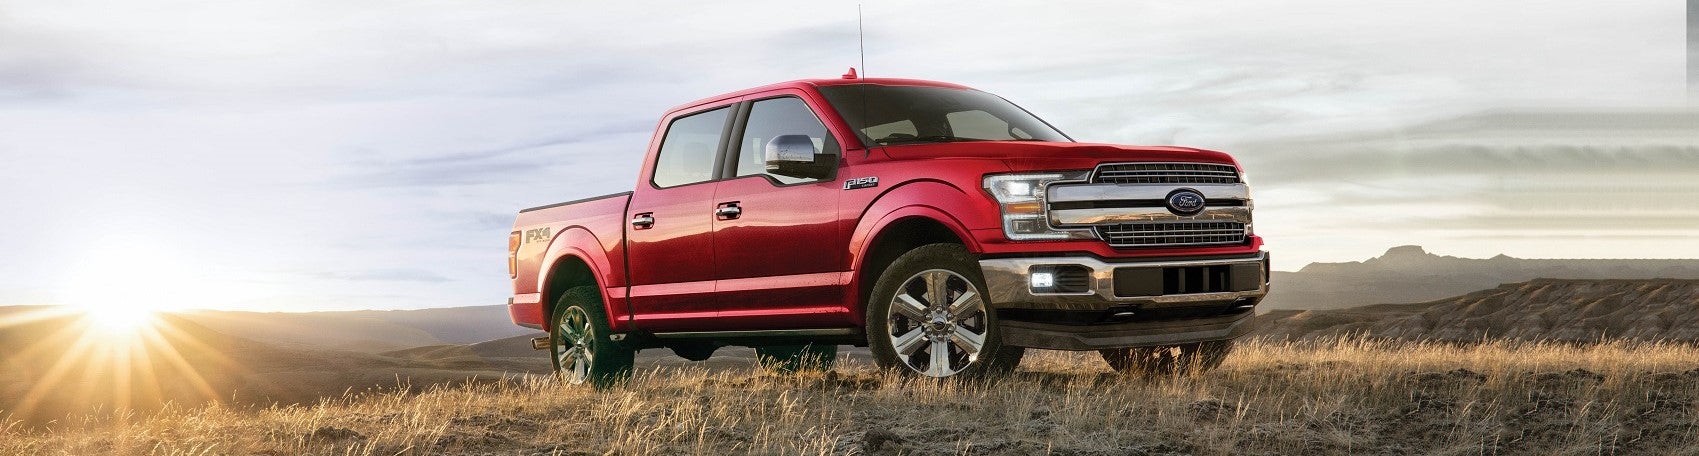 2020 Ford F-150 Review Sumner WA